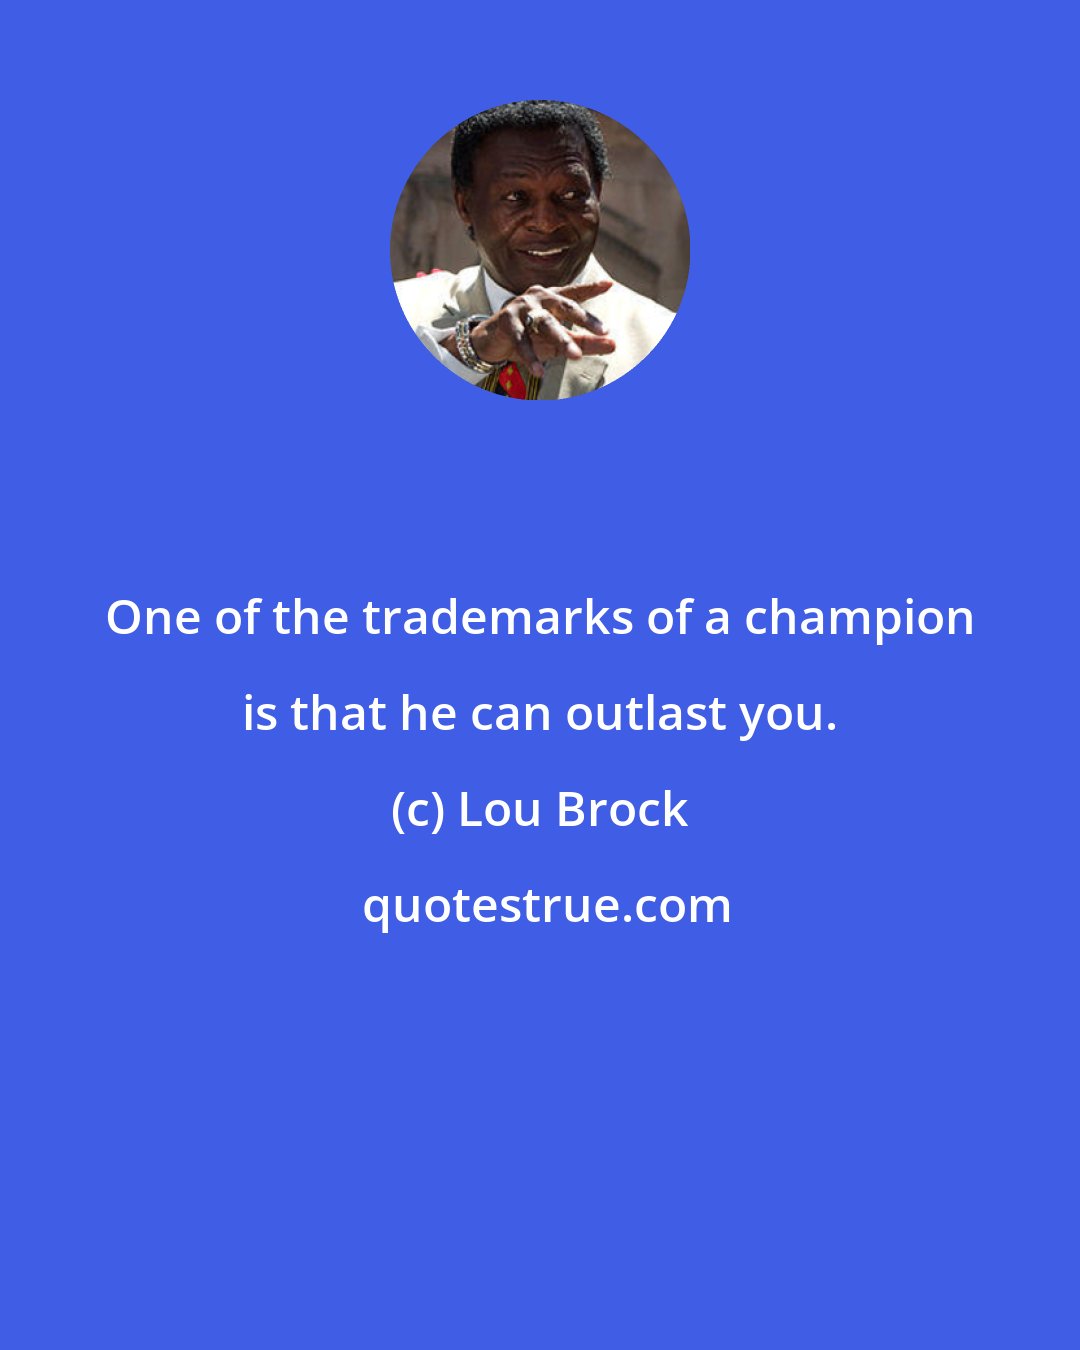 Lou Brock: One of the trademarks of a champion is that he can outlast you.